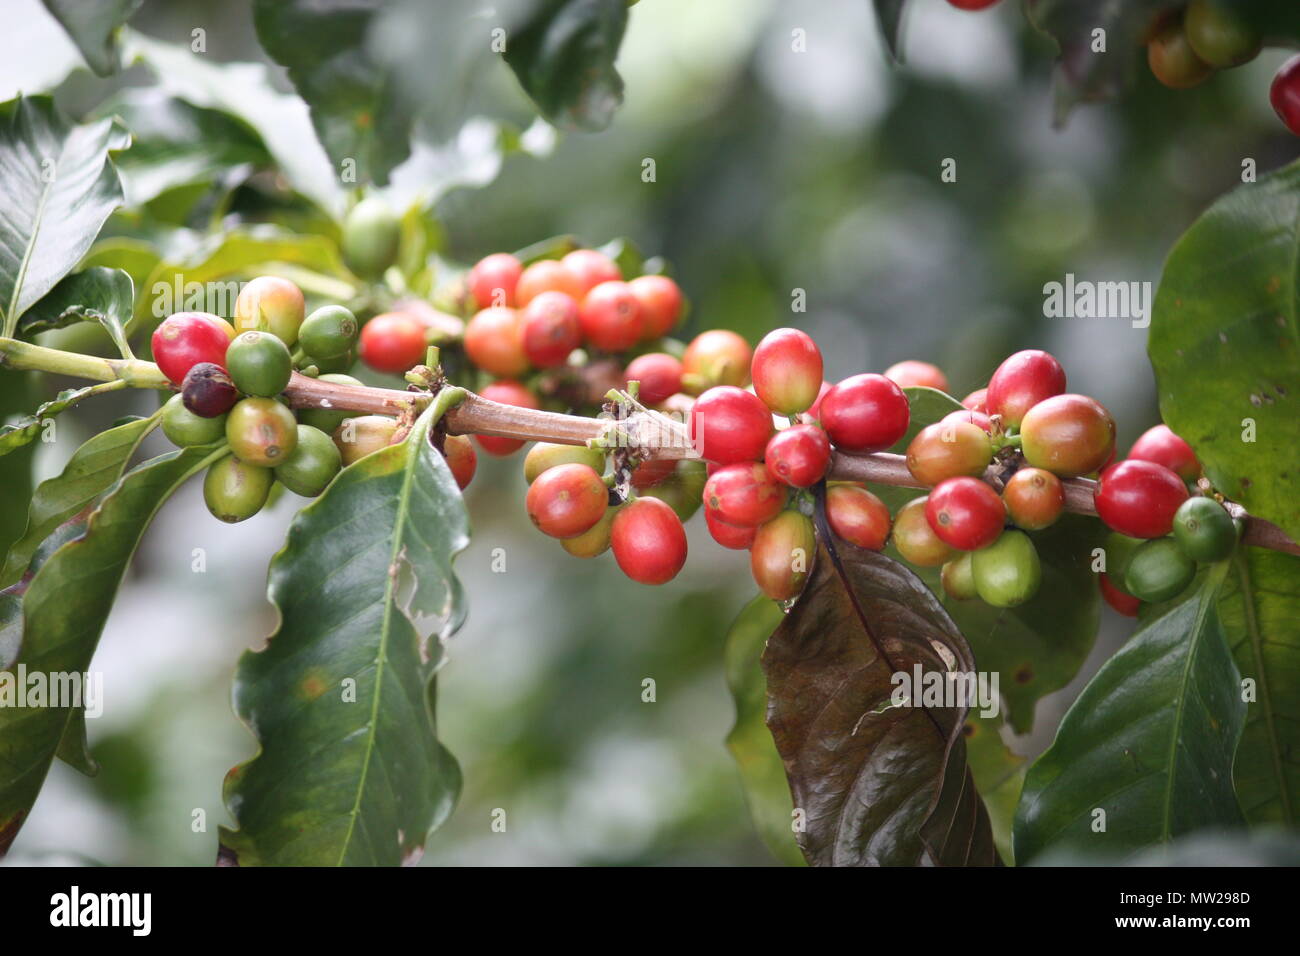 Coffee beans on plant Stock Photo